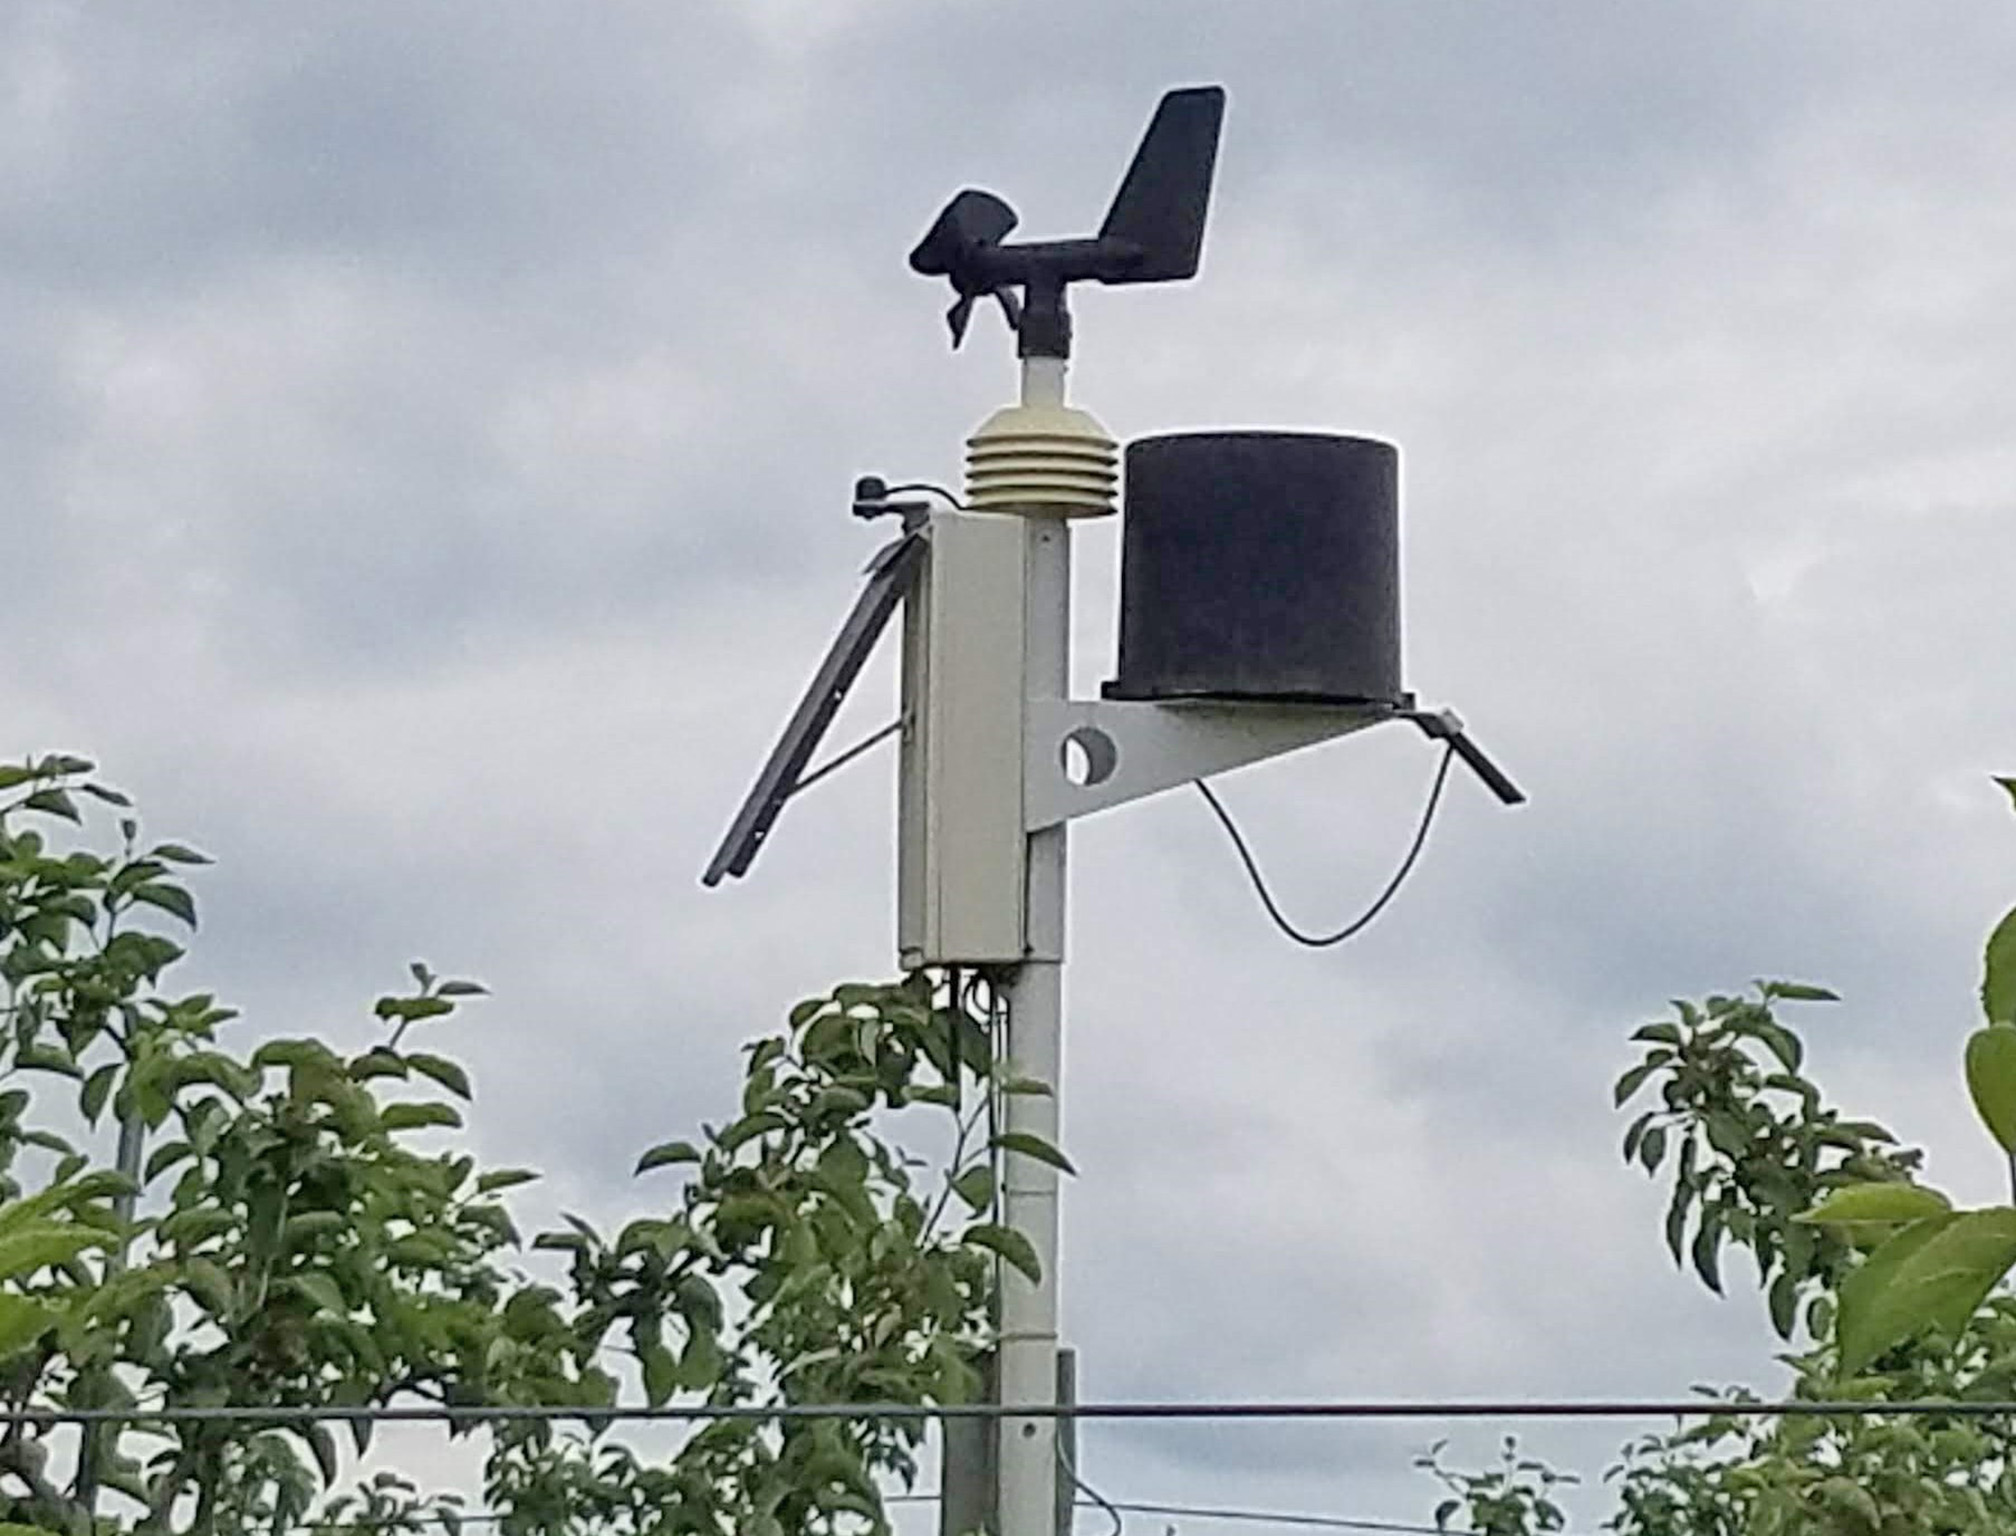 The weather station is mounted on a tall white pole that lifts it above the green leaves of fruit trees. At the top is a gadget for measuring wind with rotating fan blades and a tail so that it points in the right direction. One the right is a black cylinder holding a rain guage. on the left is a pale gray box supporting a dark-colored solar panel angled to catch the sun.